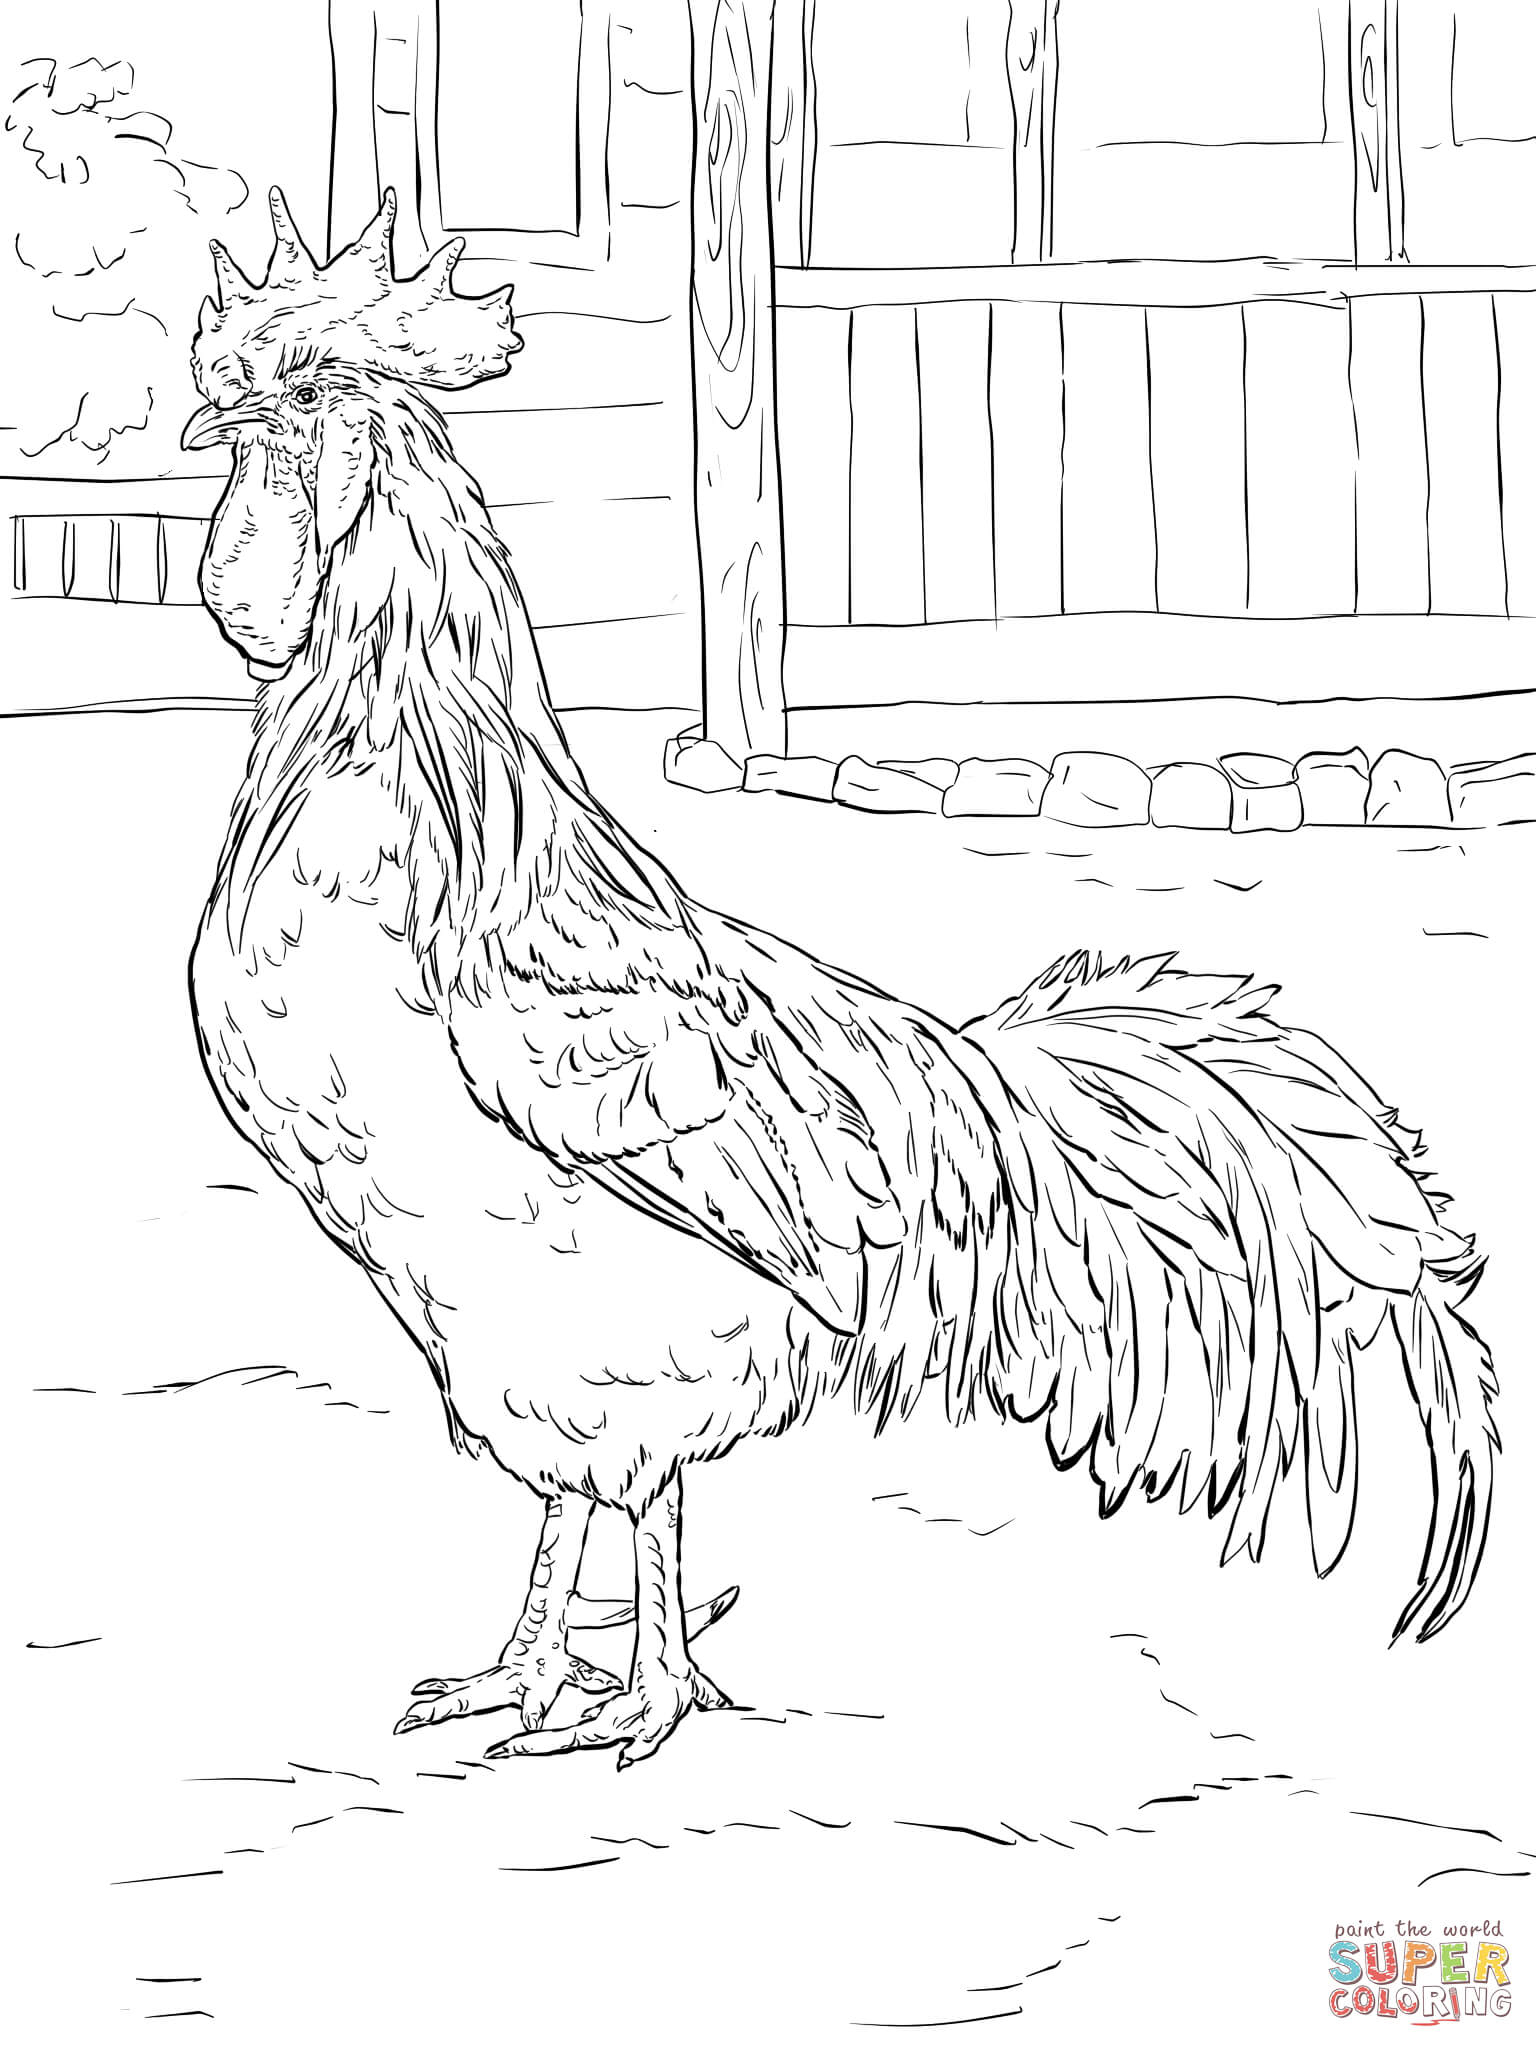 Brown Leghorn Rooster Coloring Page | Free Printable Coloring Pages - Free Printable Pictures Of Roosters